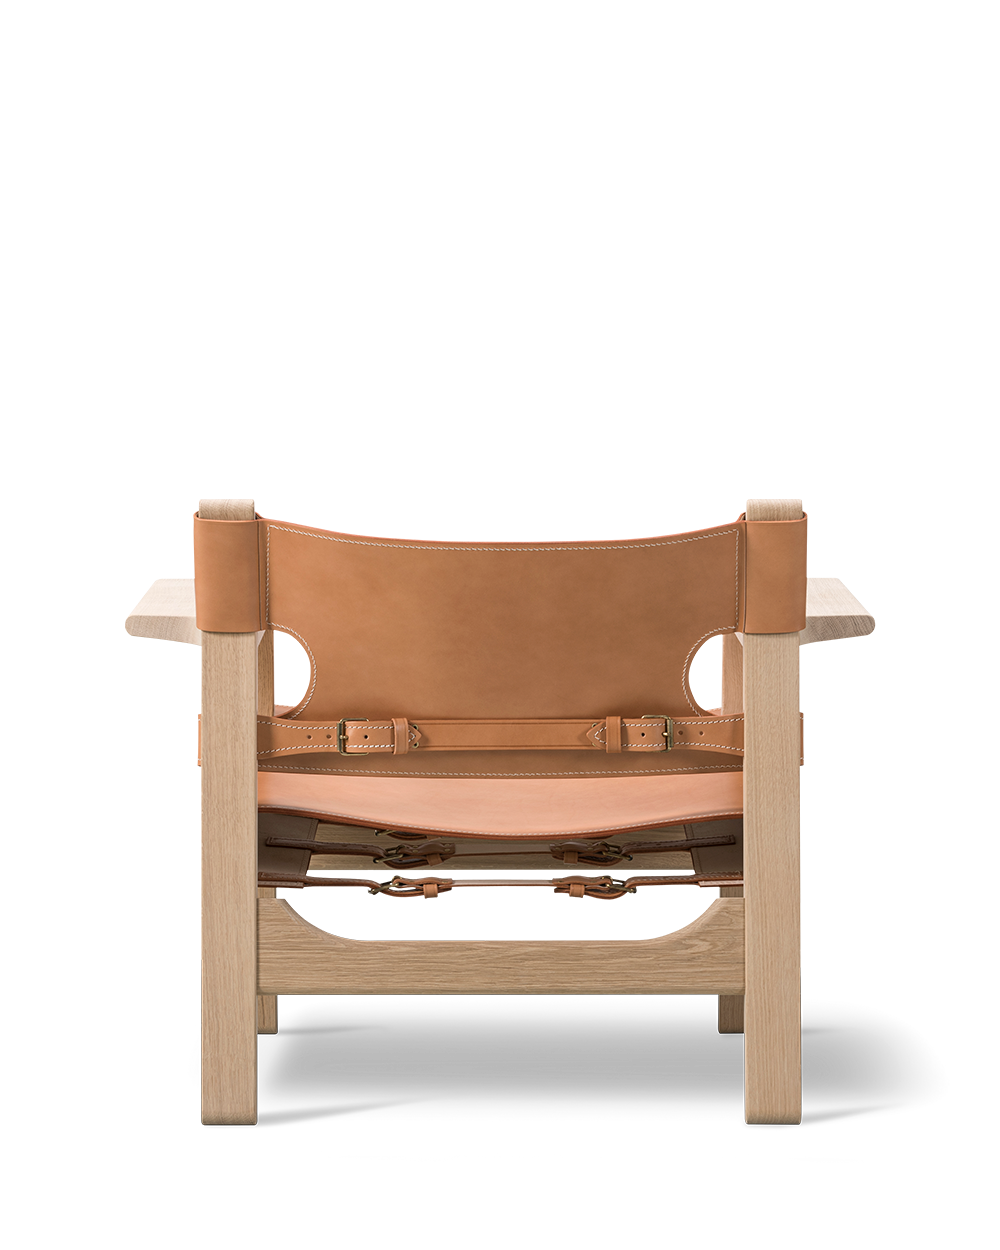 Fredericia The Spanish Chair - Natural Leather - a sustainably designed chair with an oak wooden frame and vegetable leather seating - Enter The Loft